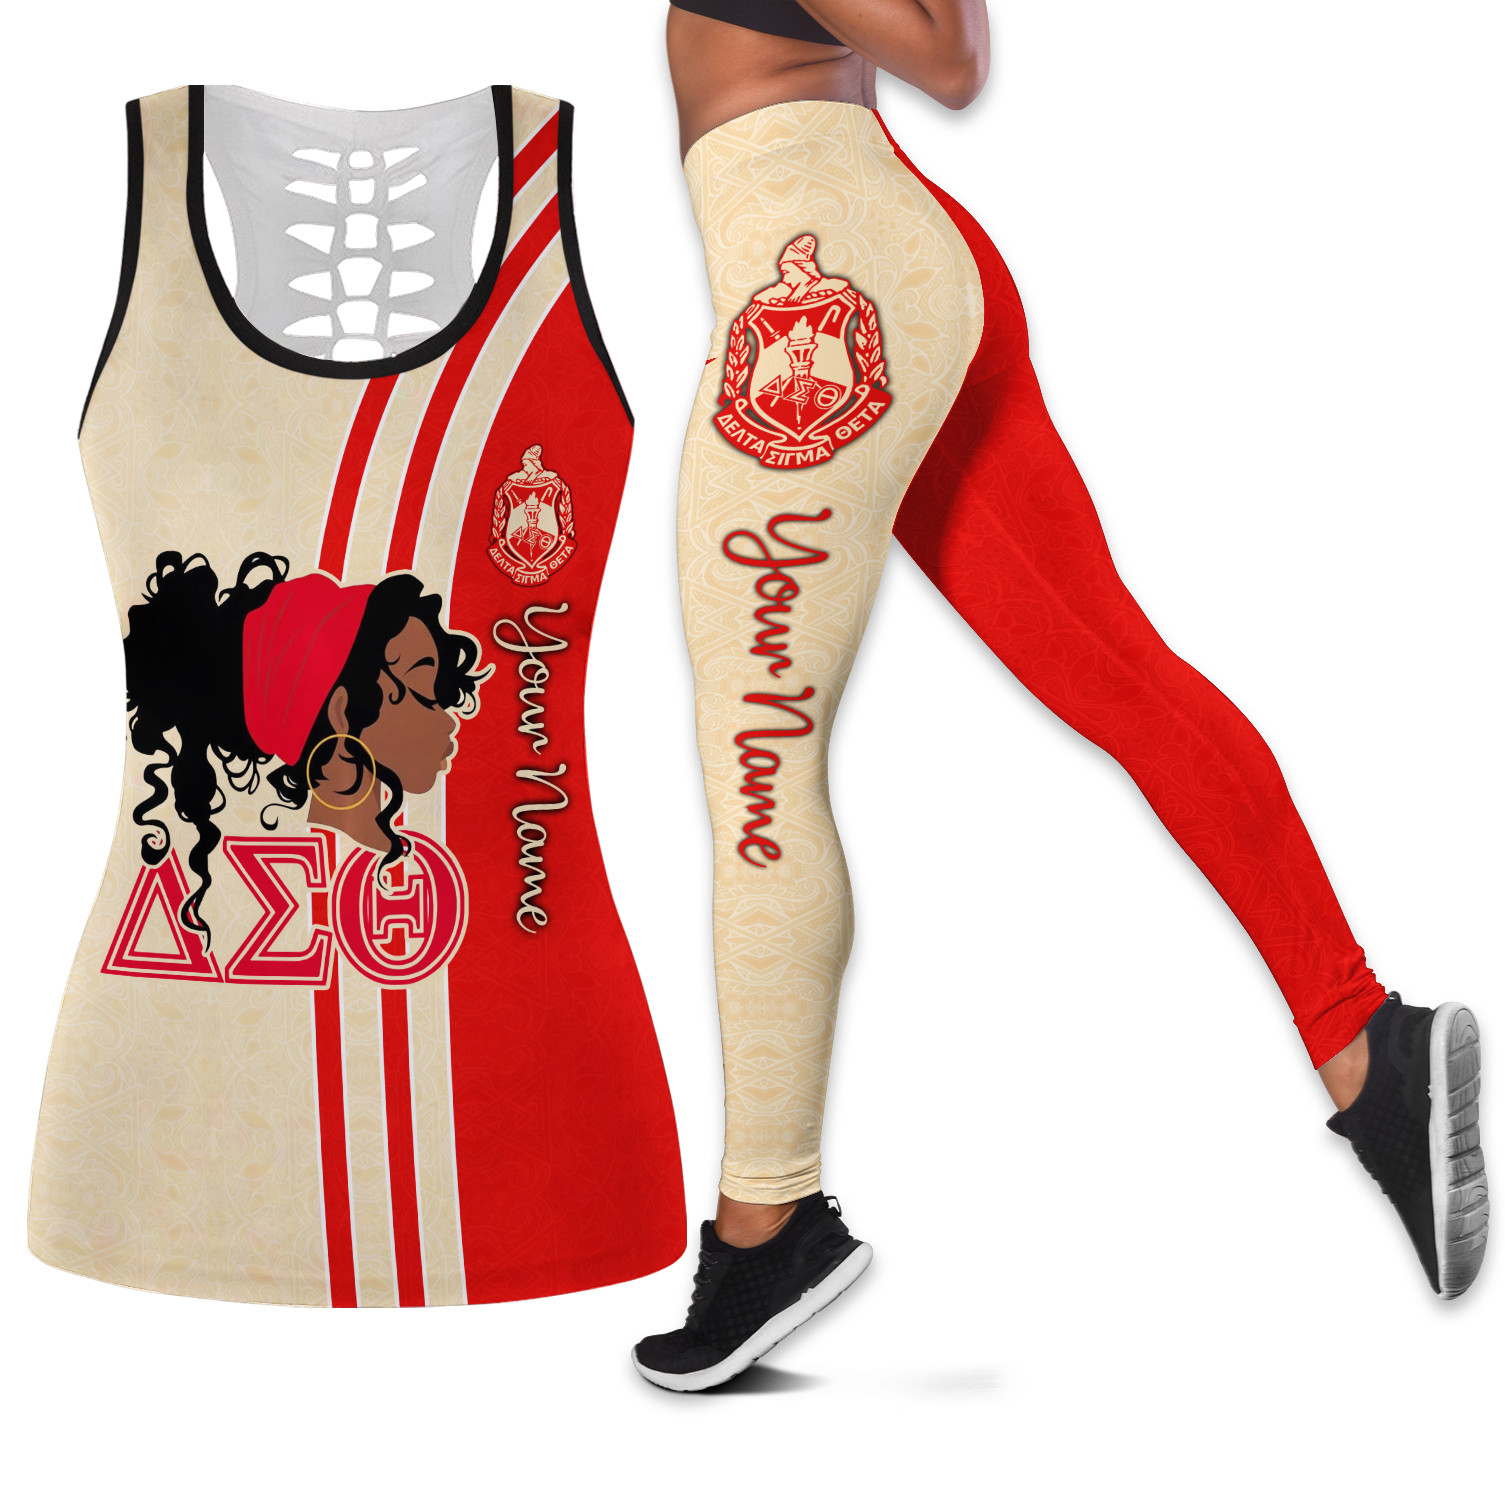 Personalized Delta Sigma Theta Tank Top And Legging For Women PAN3DSET0223